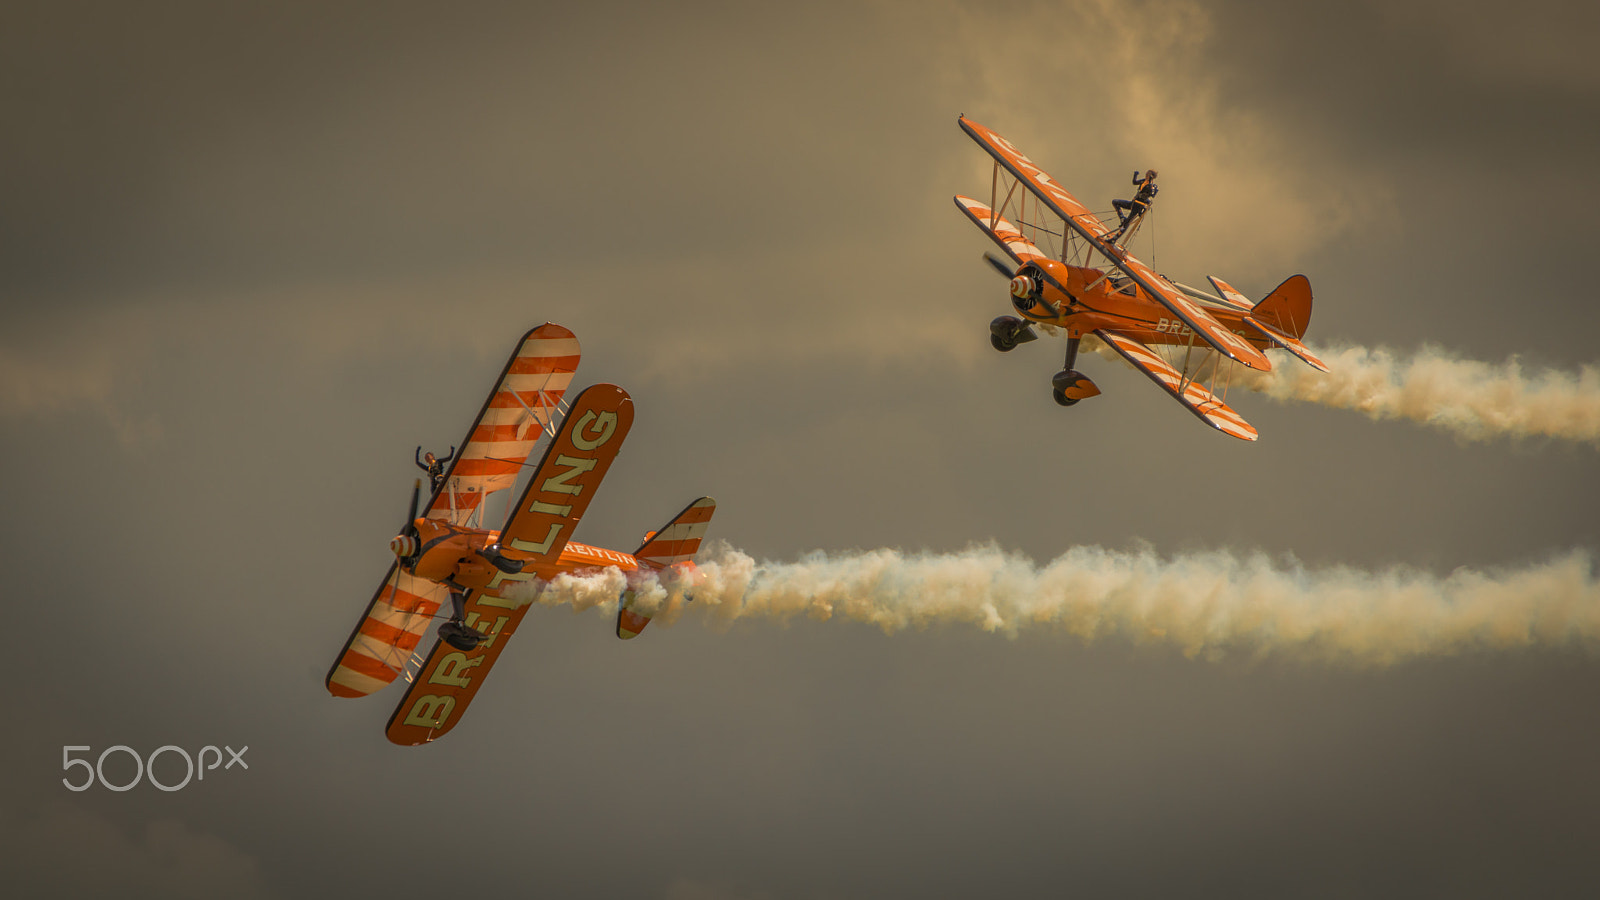 Nikon D800 sample photo. Breitling wing walkers display team photography